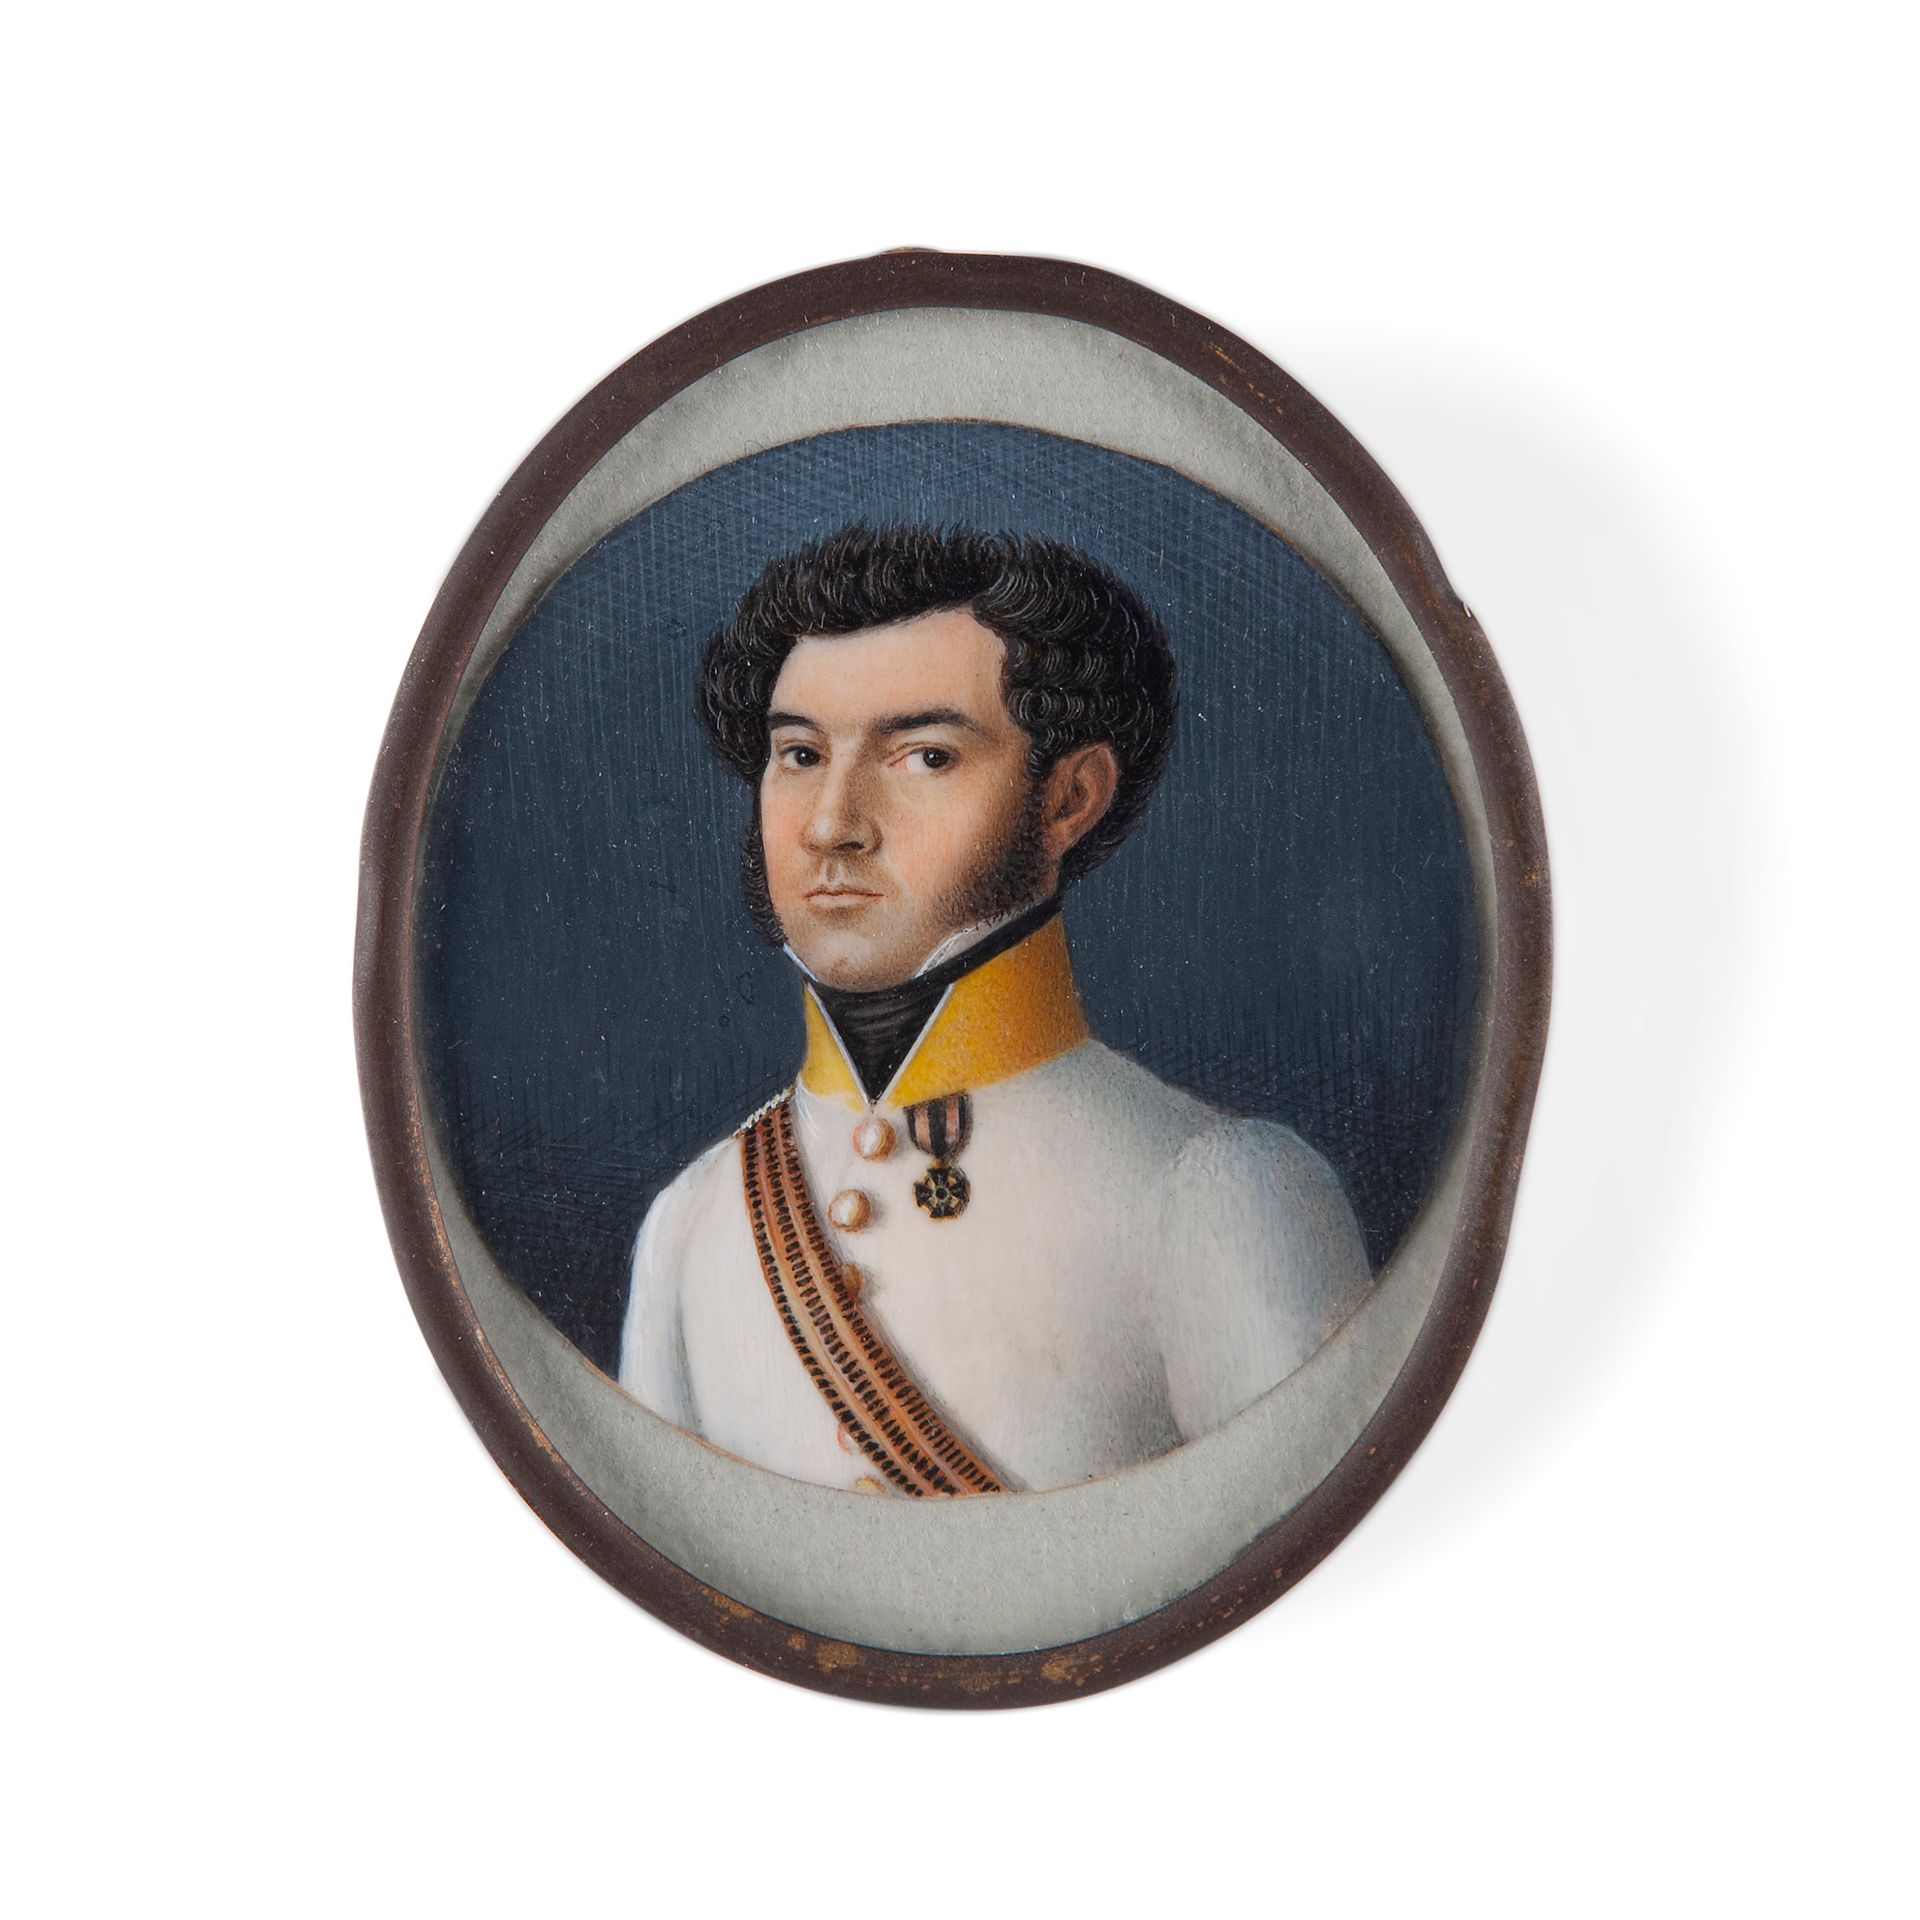 Portrait miniature of an official, late 18th - early 19th century Offiziell mögl&hellip;